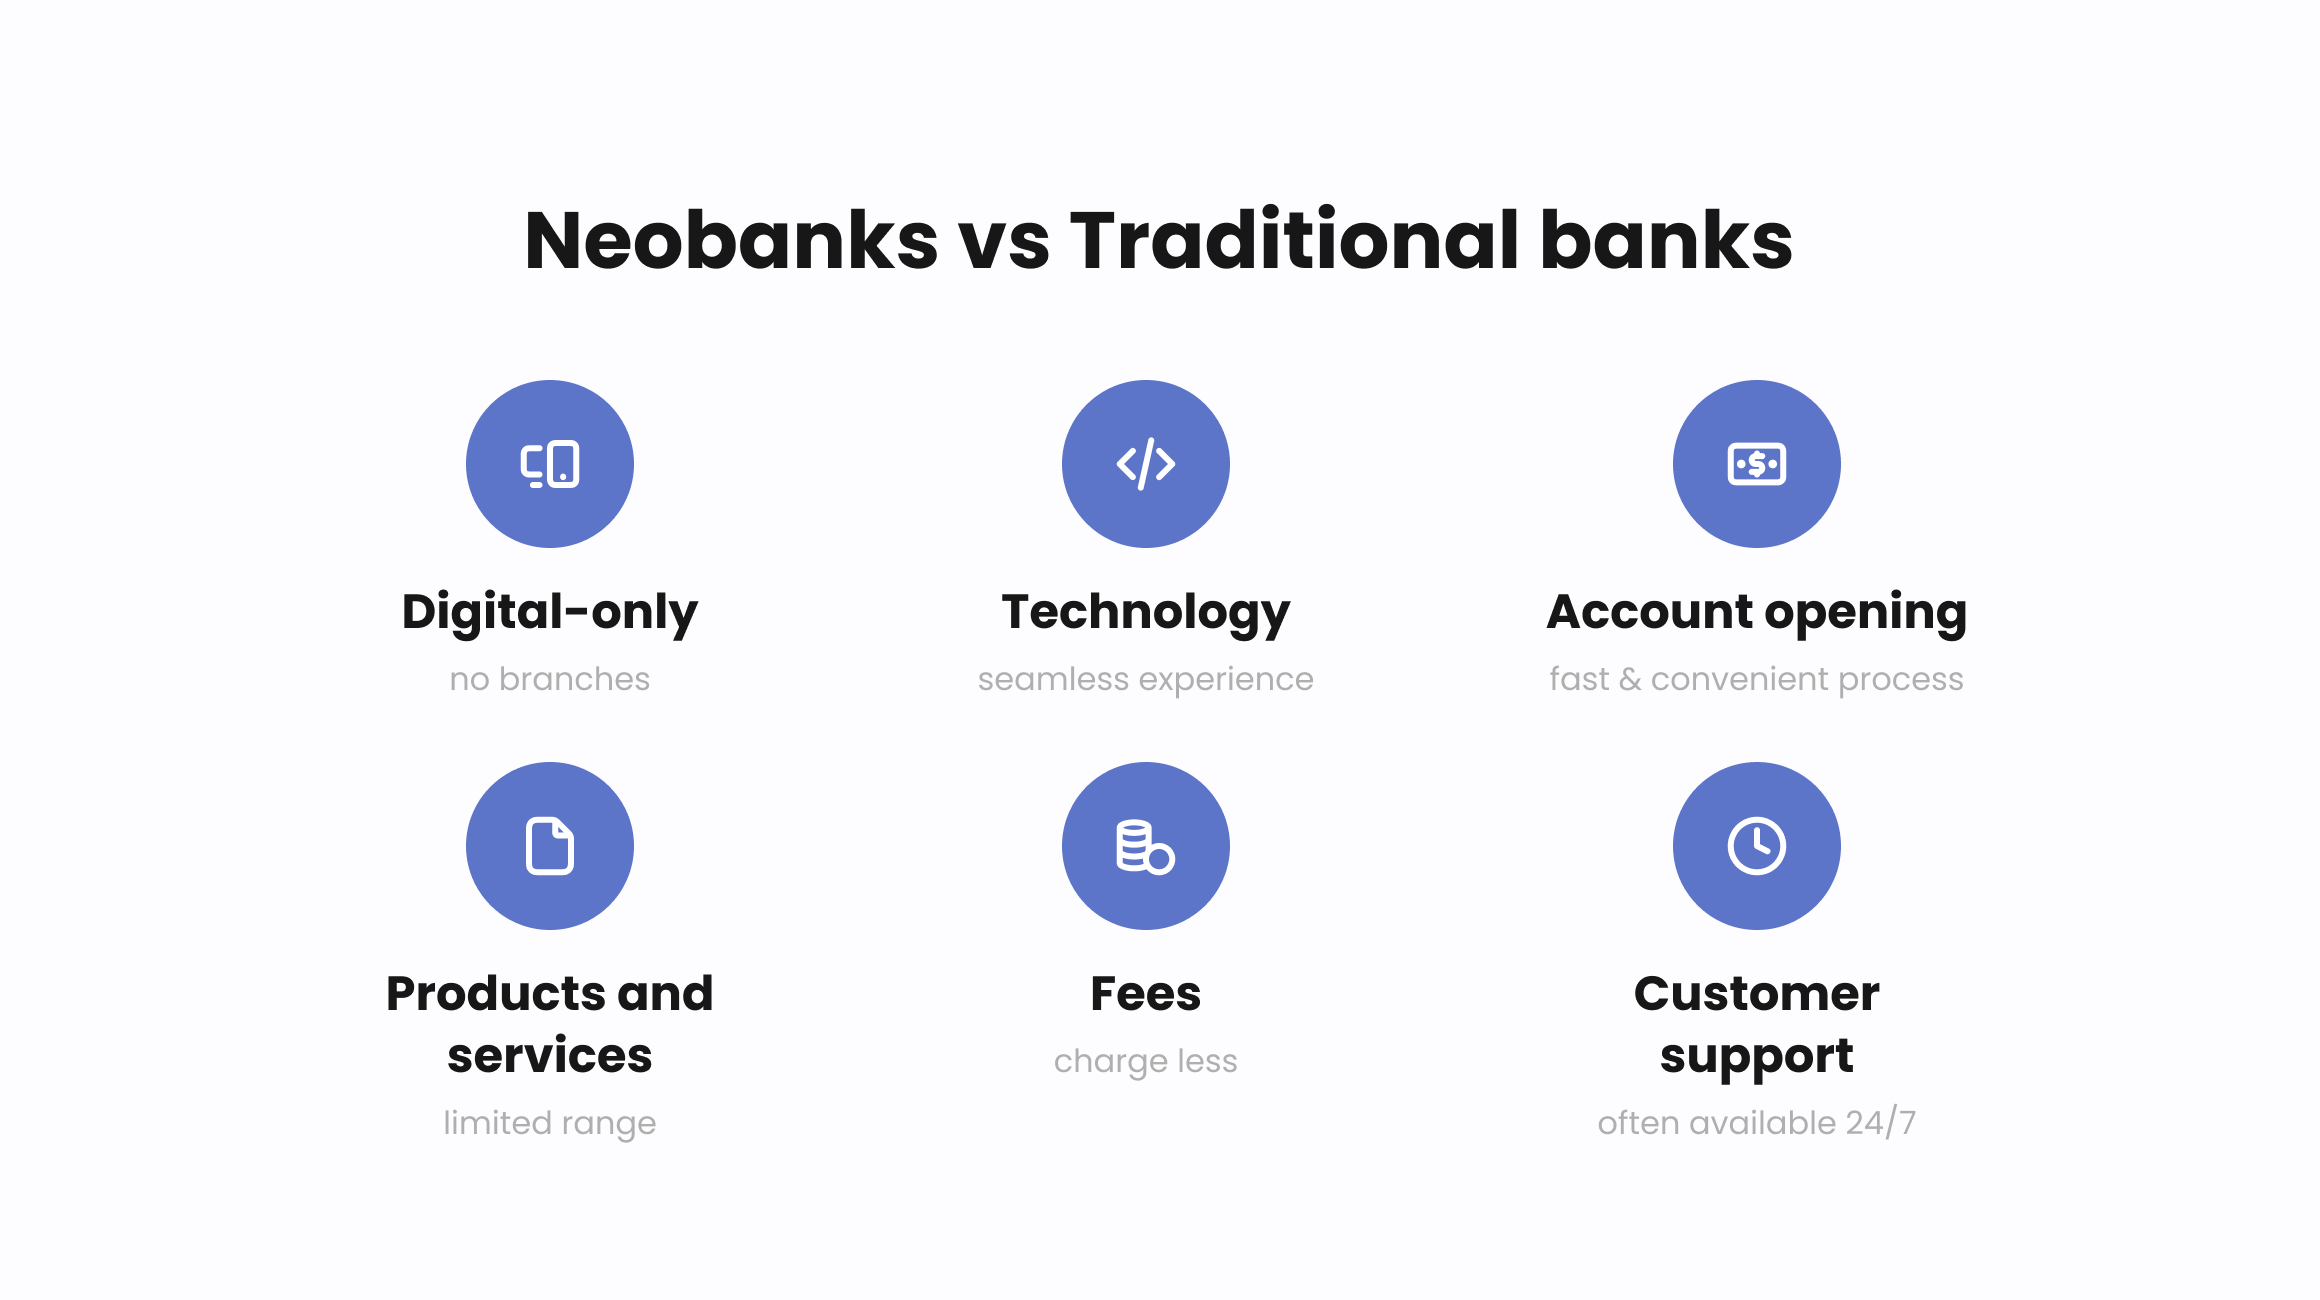 Differences between neobanks and traditional banks